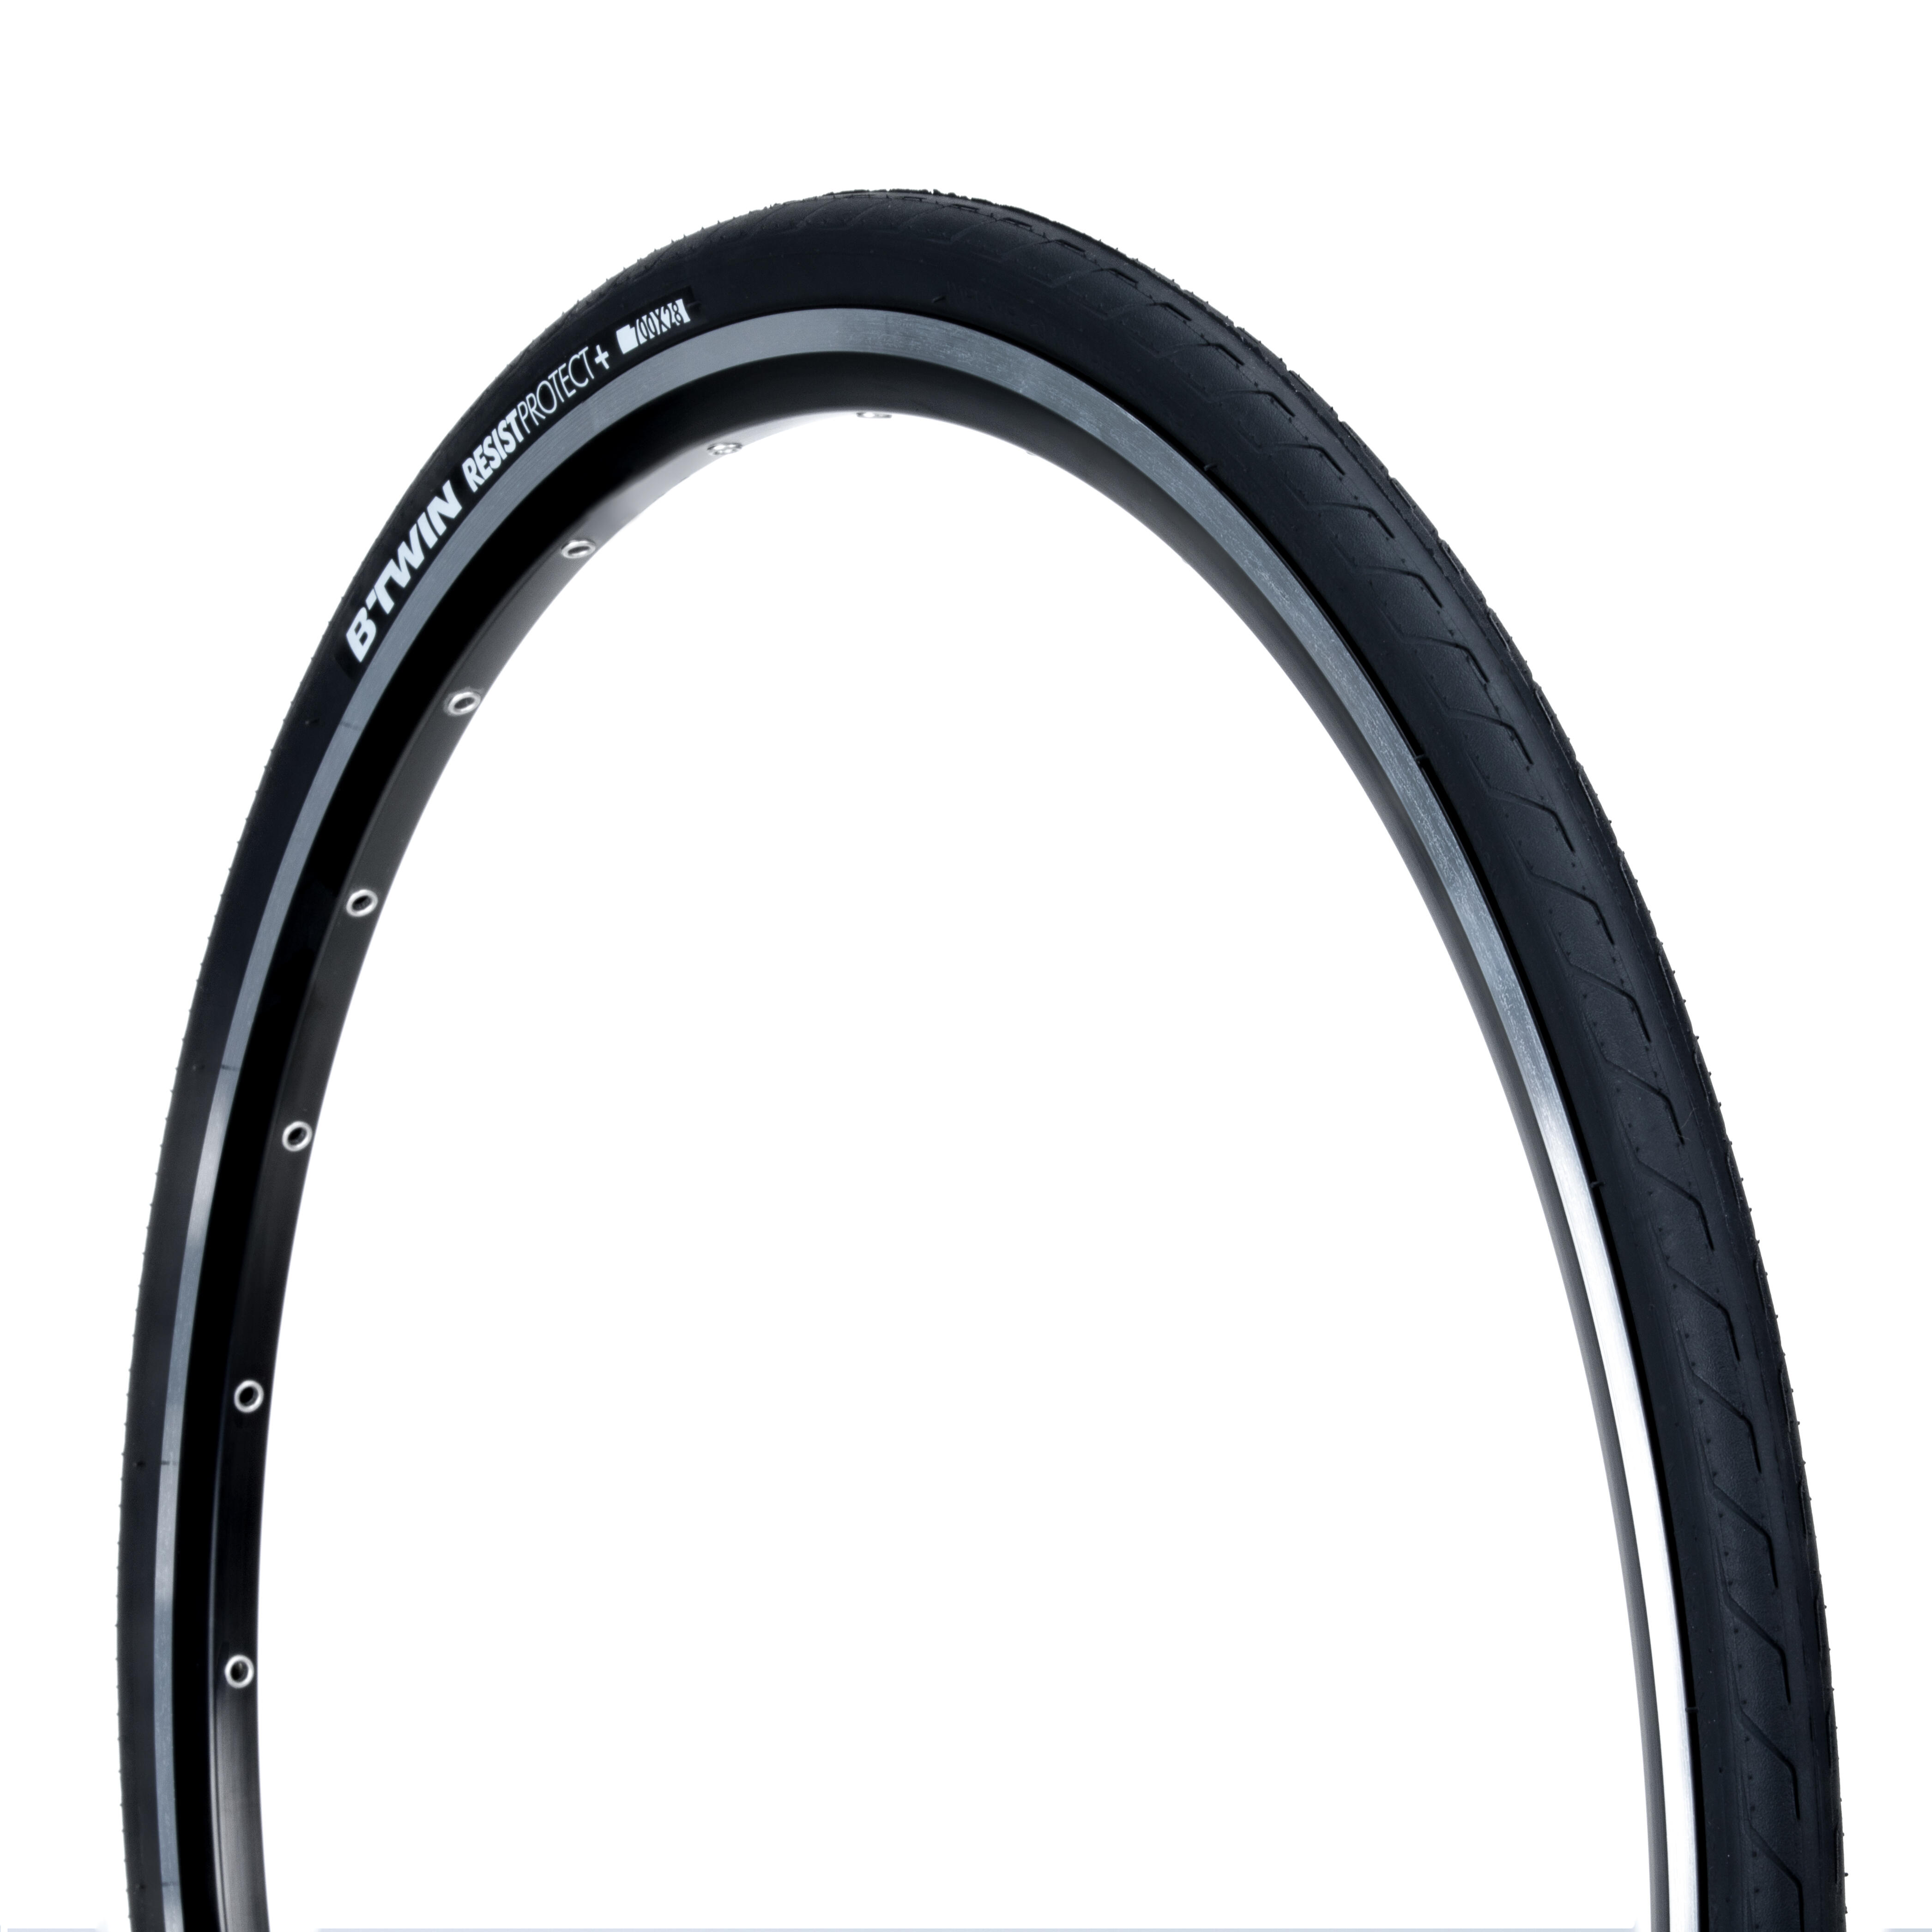 btwin resist protect 700x28